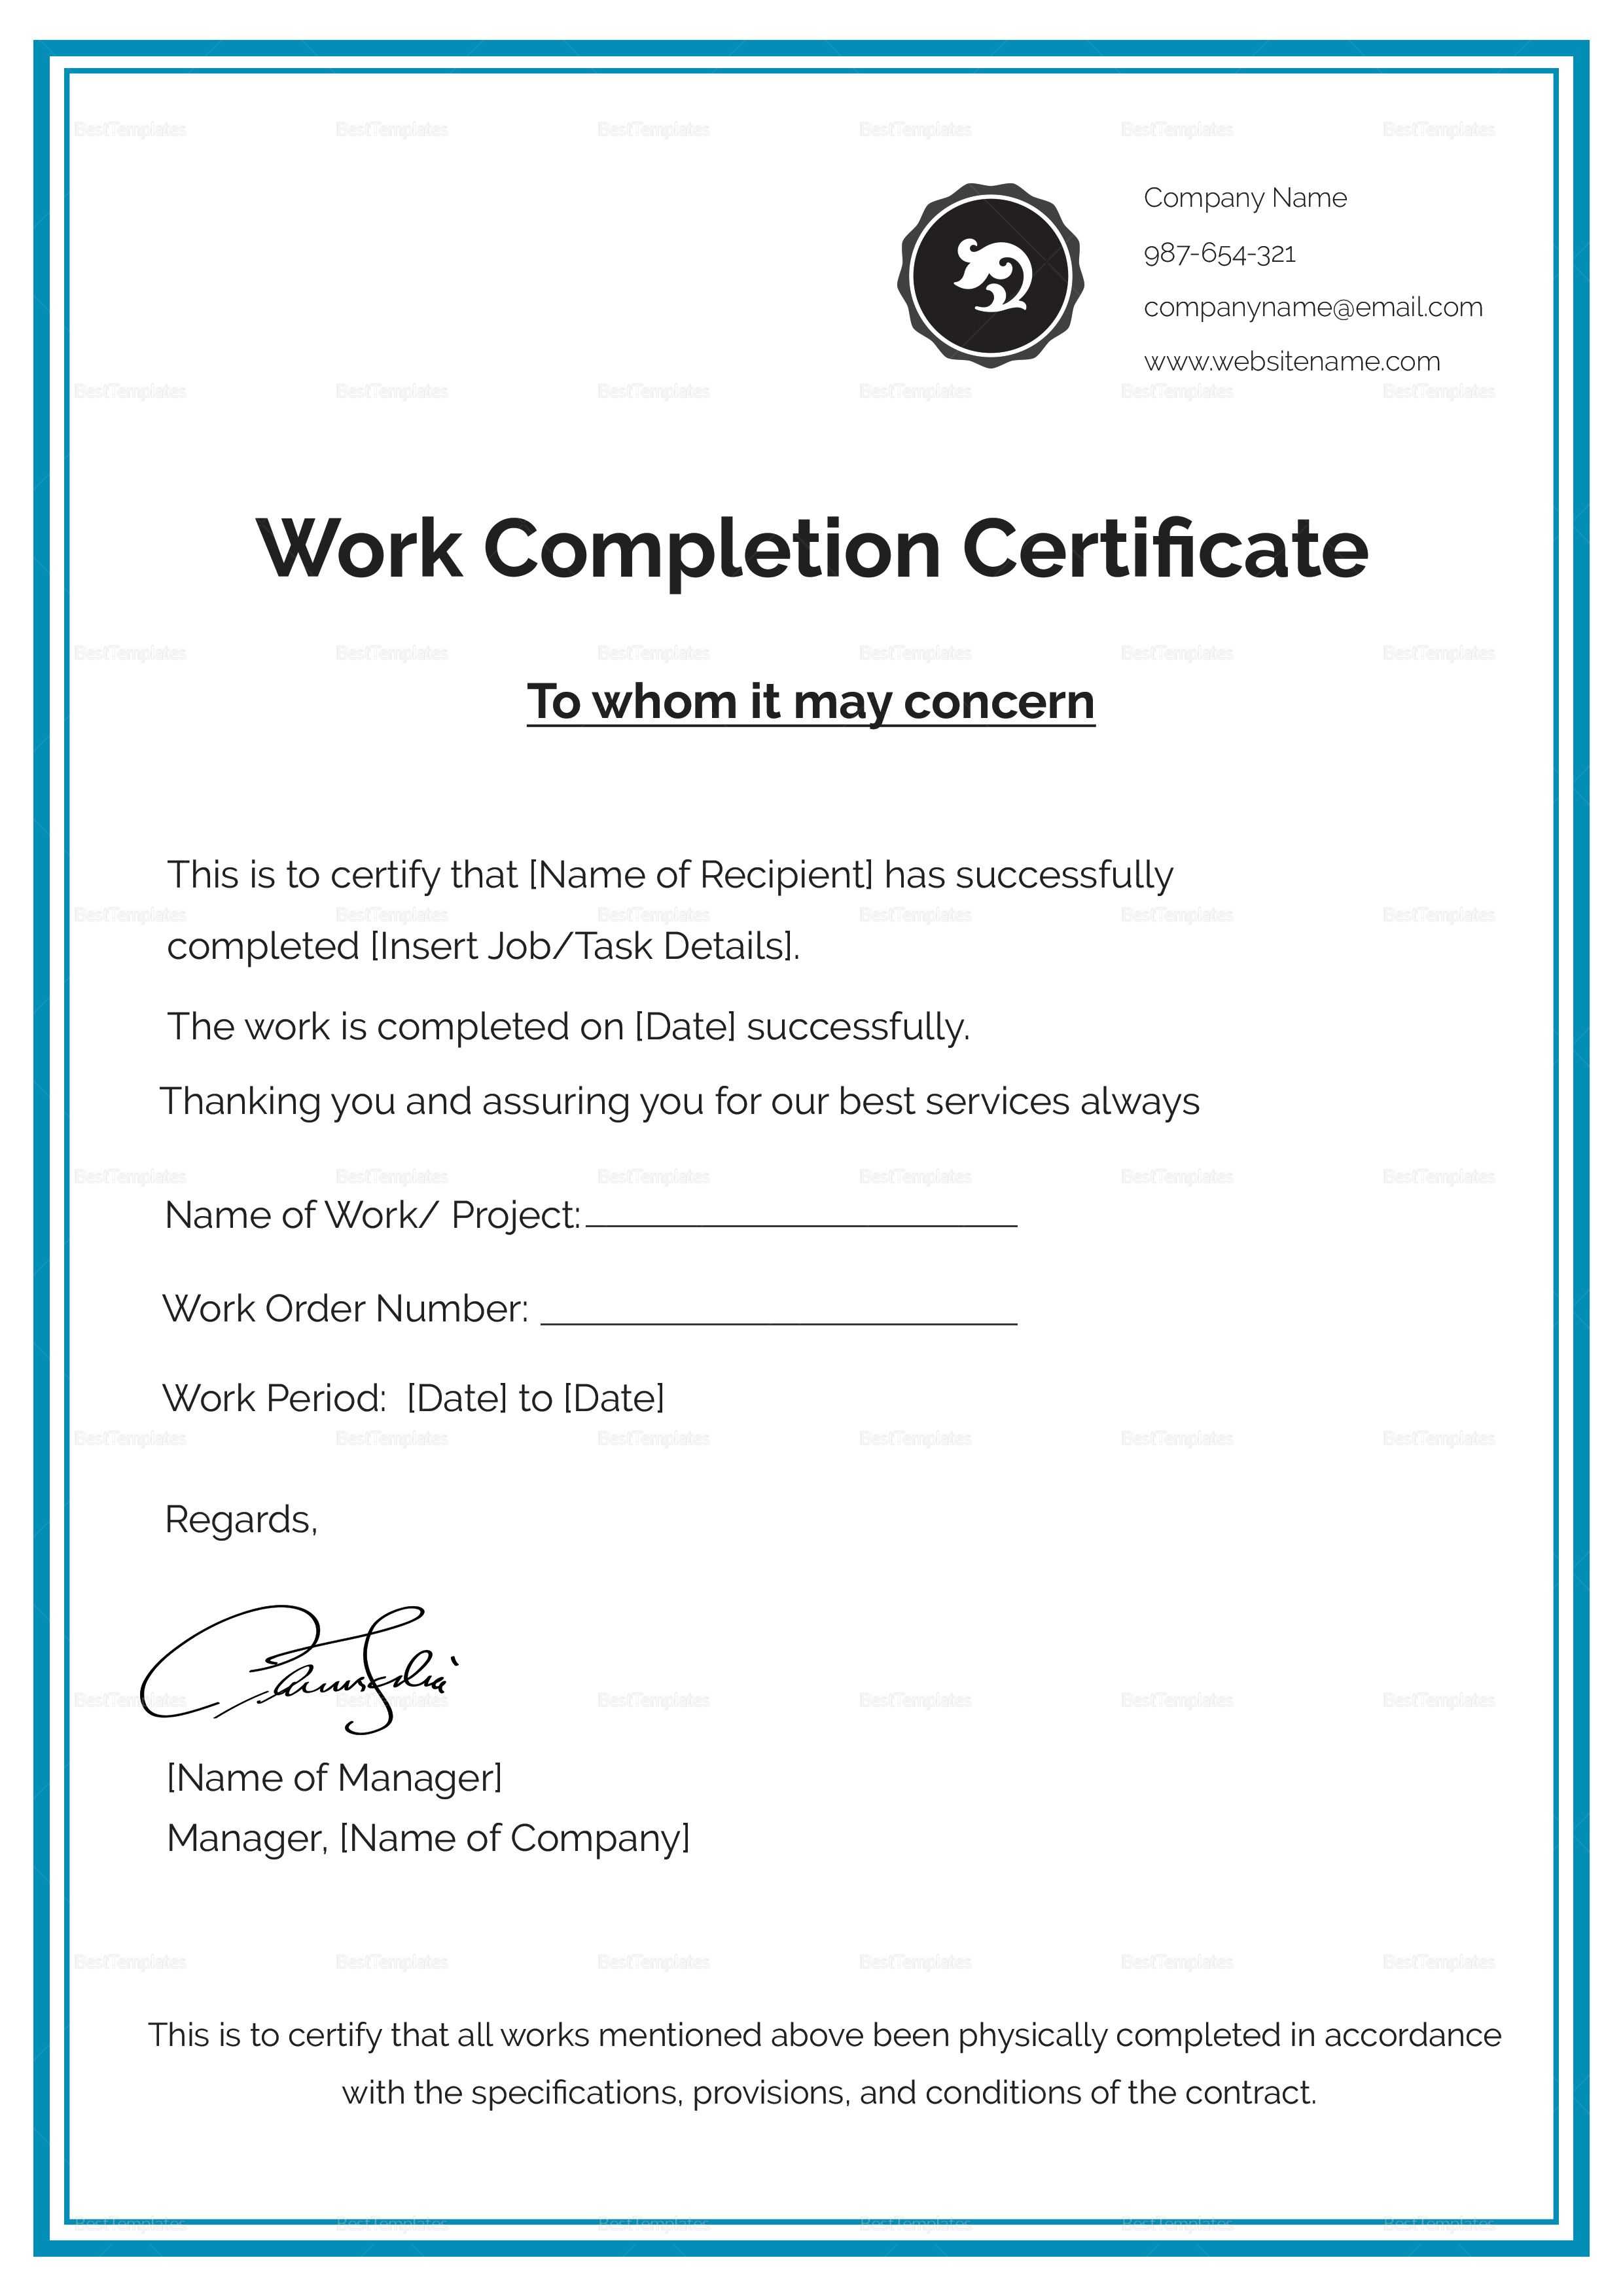 Work Completion Certificate Template In 2019 | Certificate Regarding Construction Certificate Of Completion Template